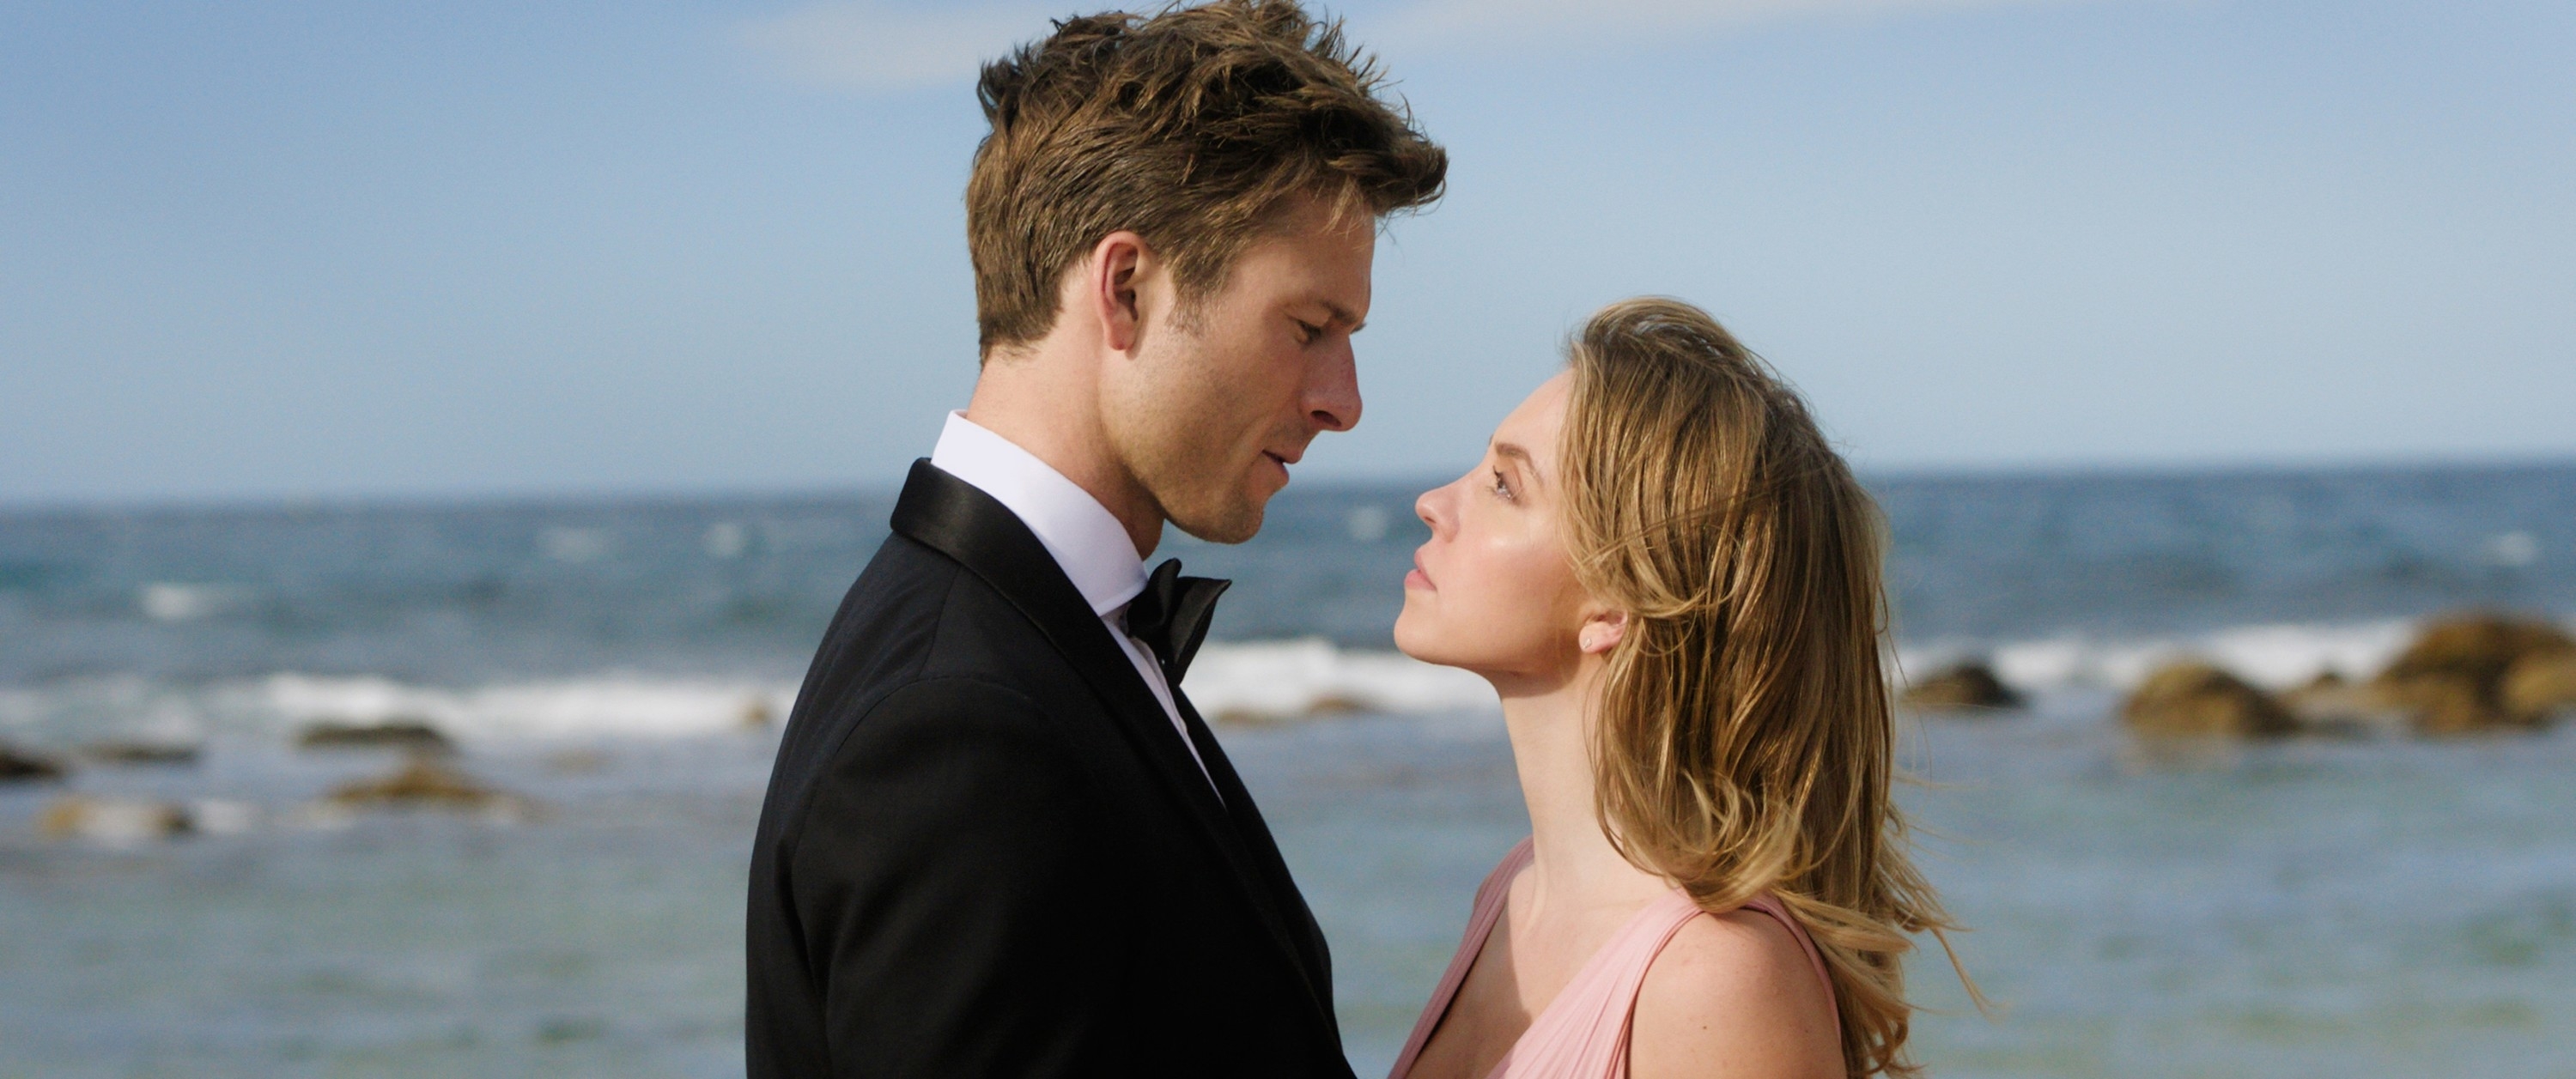 Ben and Bea stand close together on a beach, exchanging a tense look